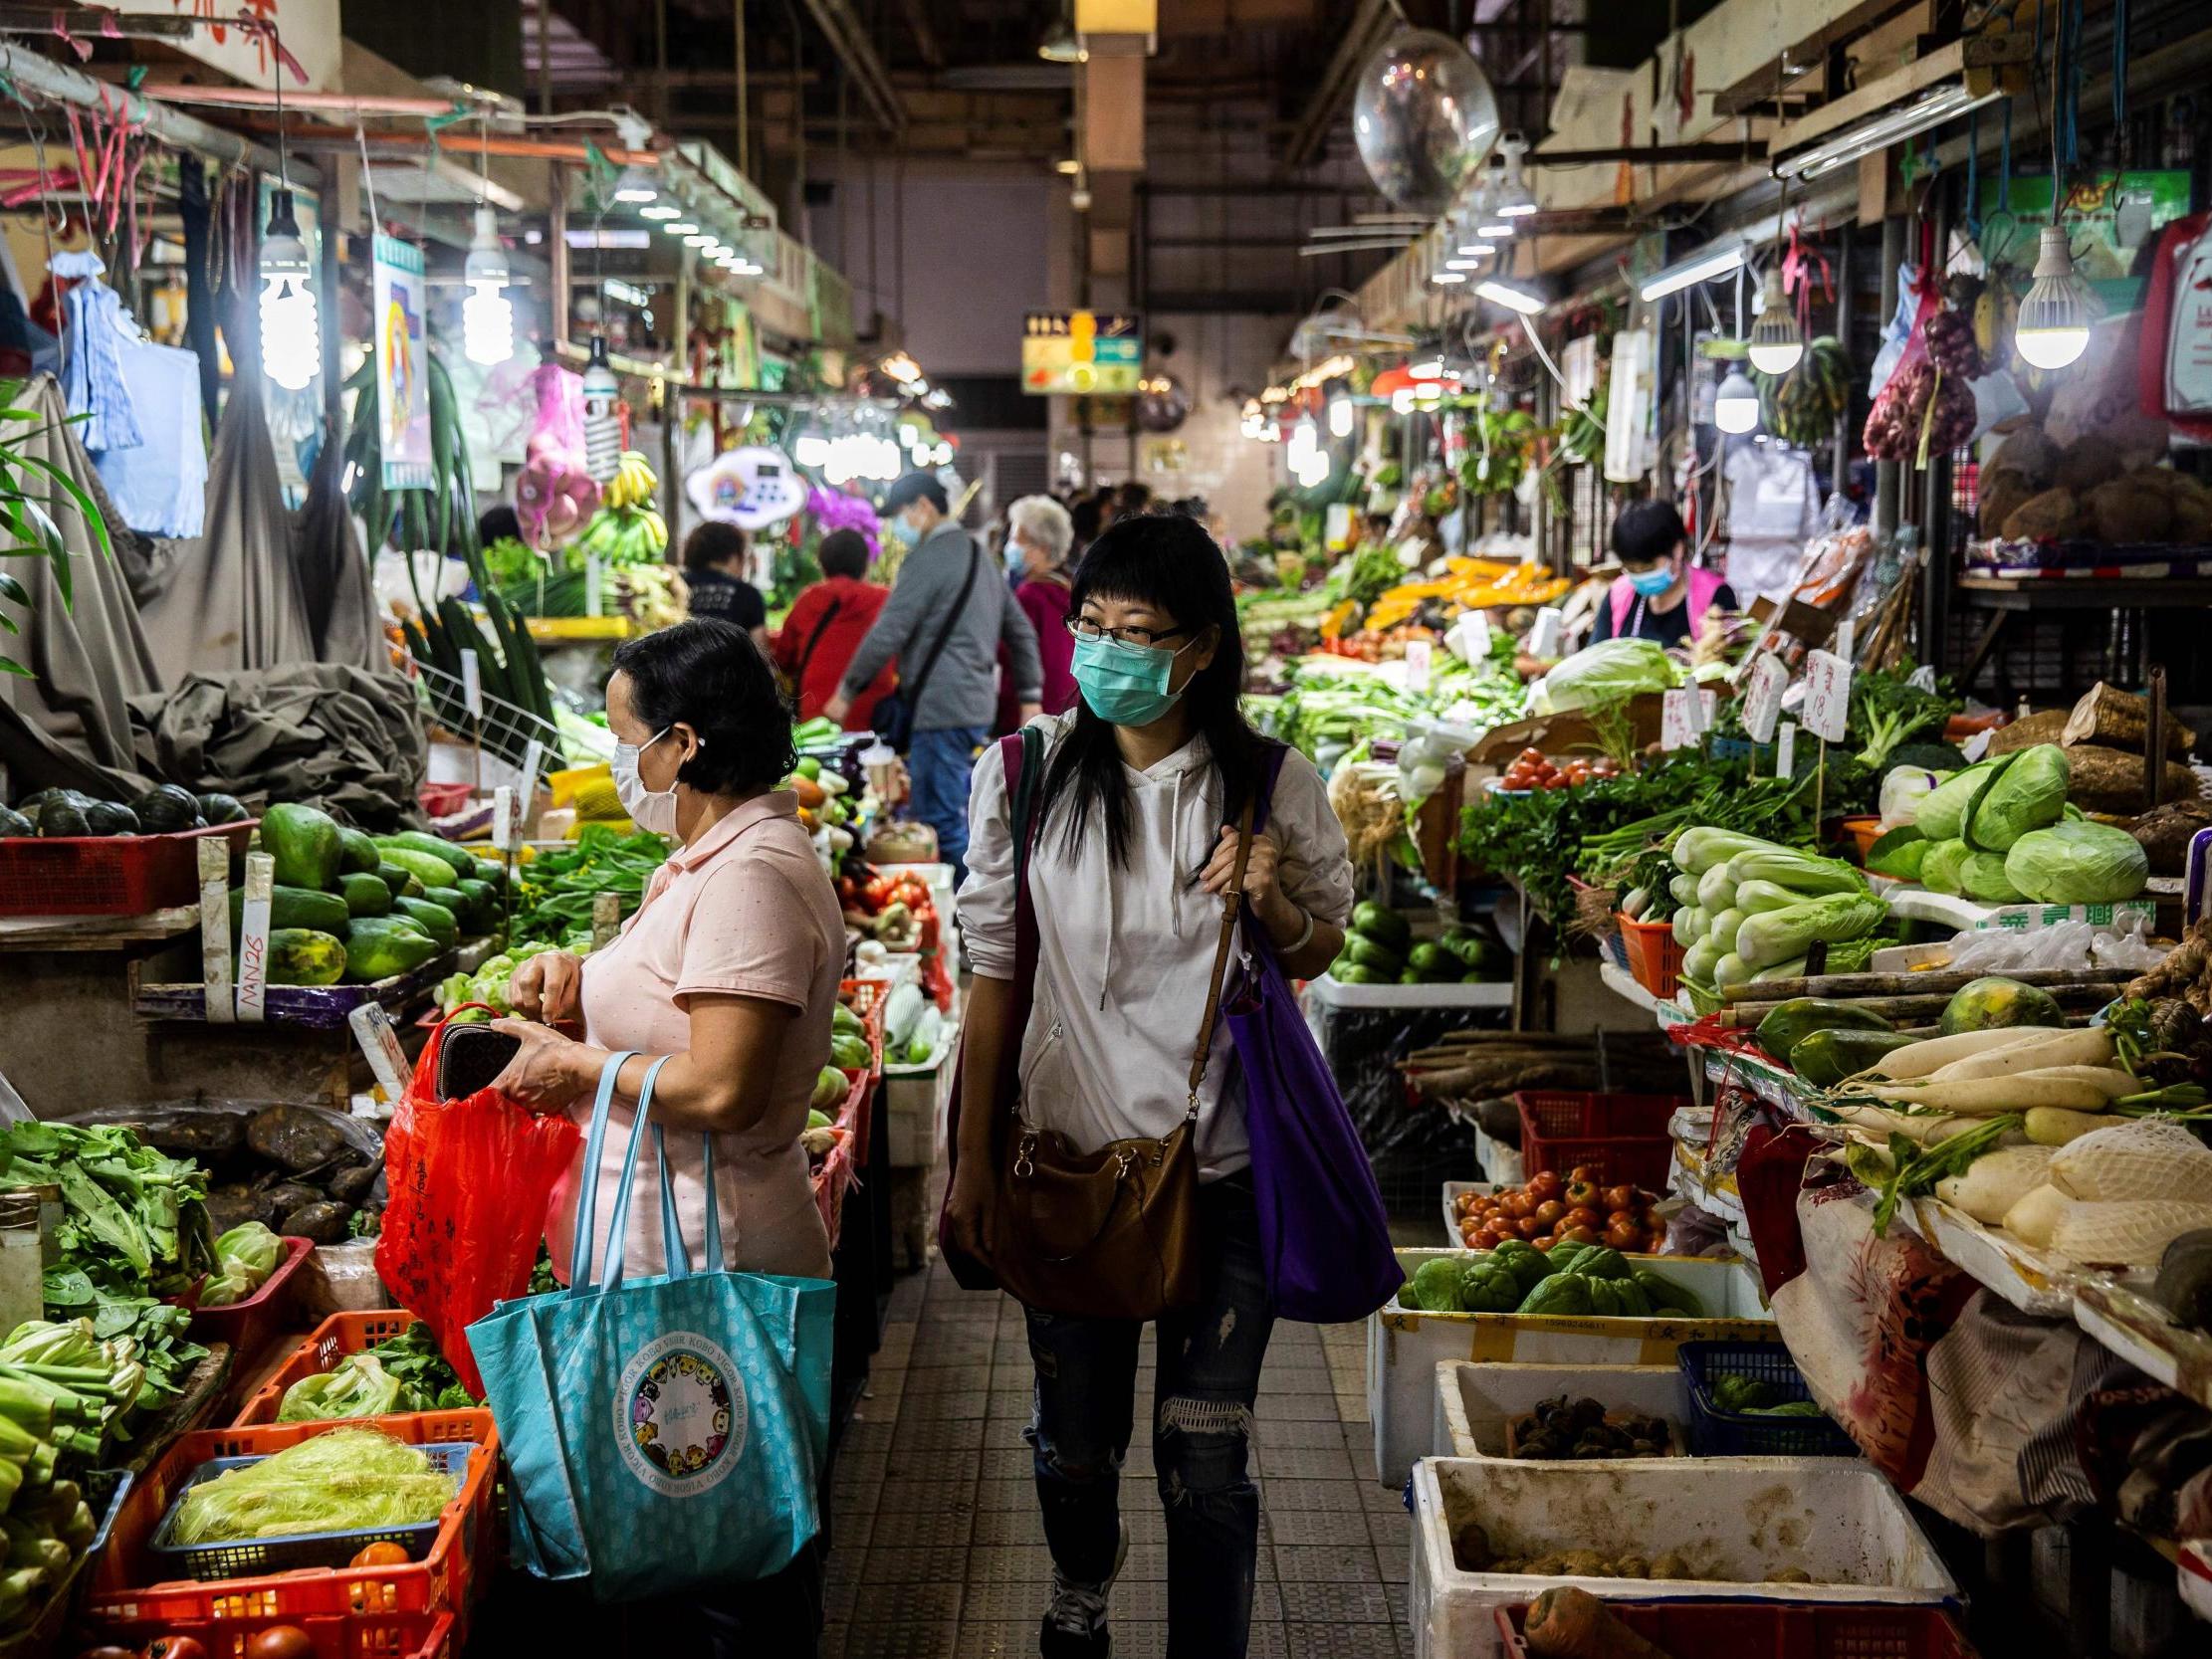 A woman walks through a Hong Kong market wearing a face mask before coronavirus became the pandemic it is today